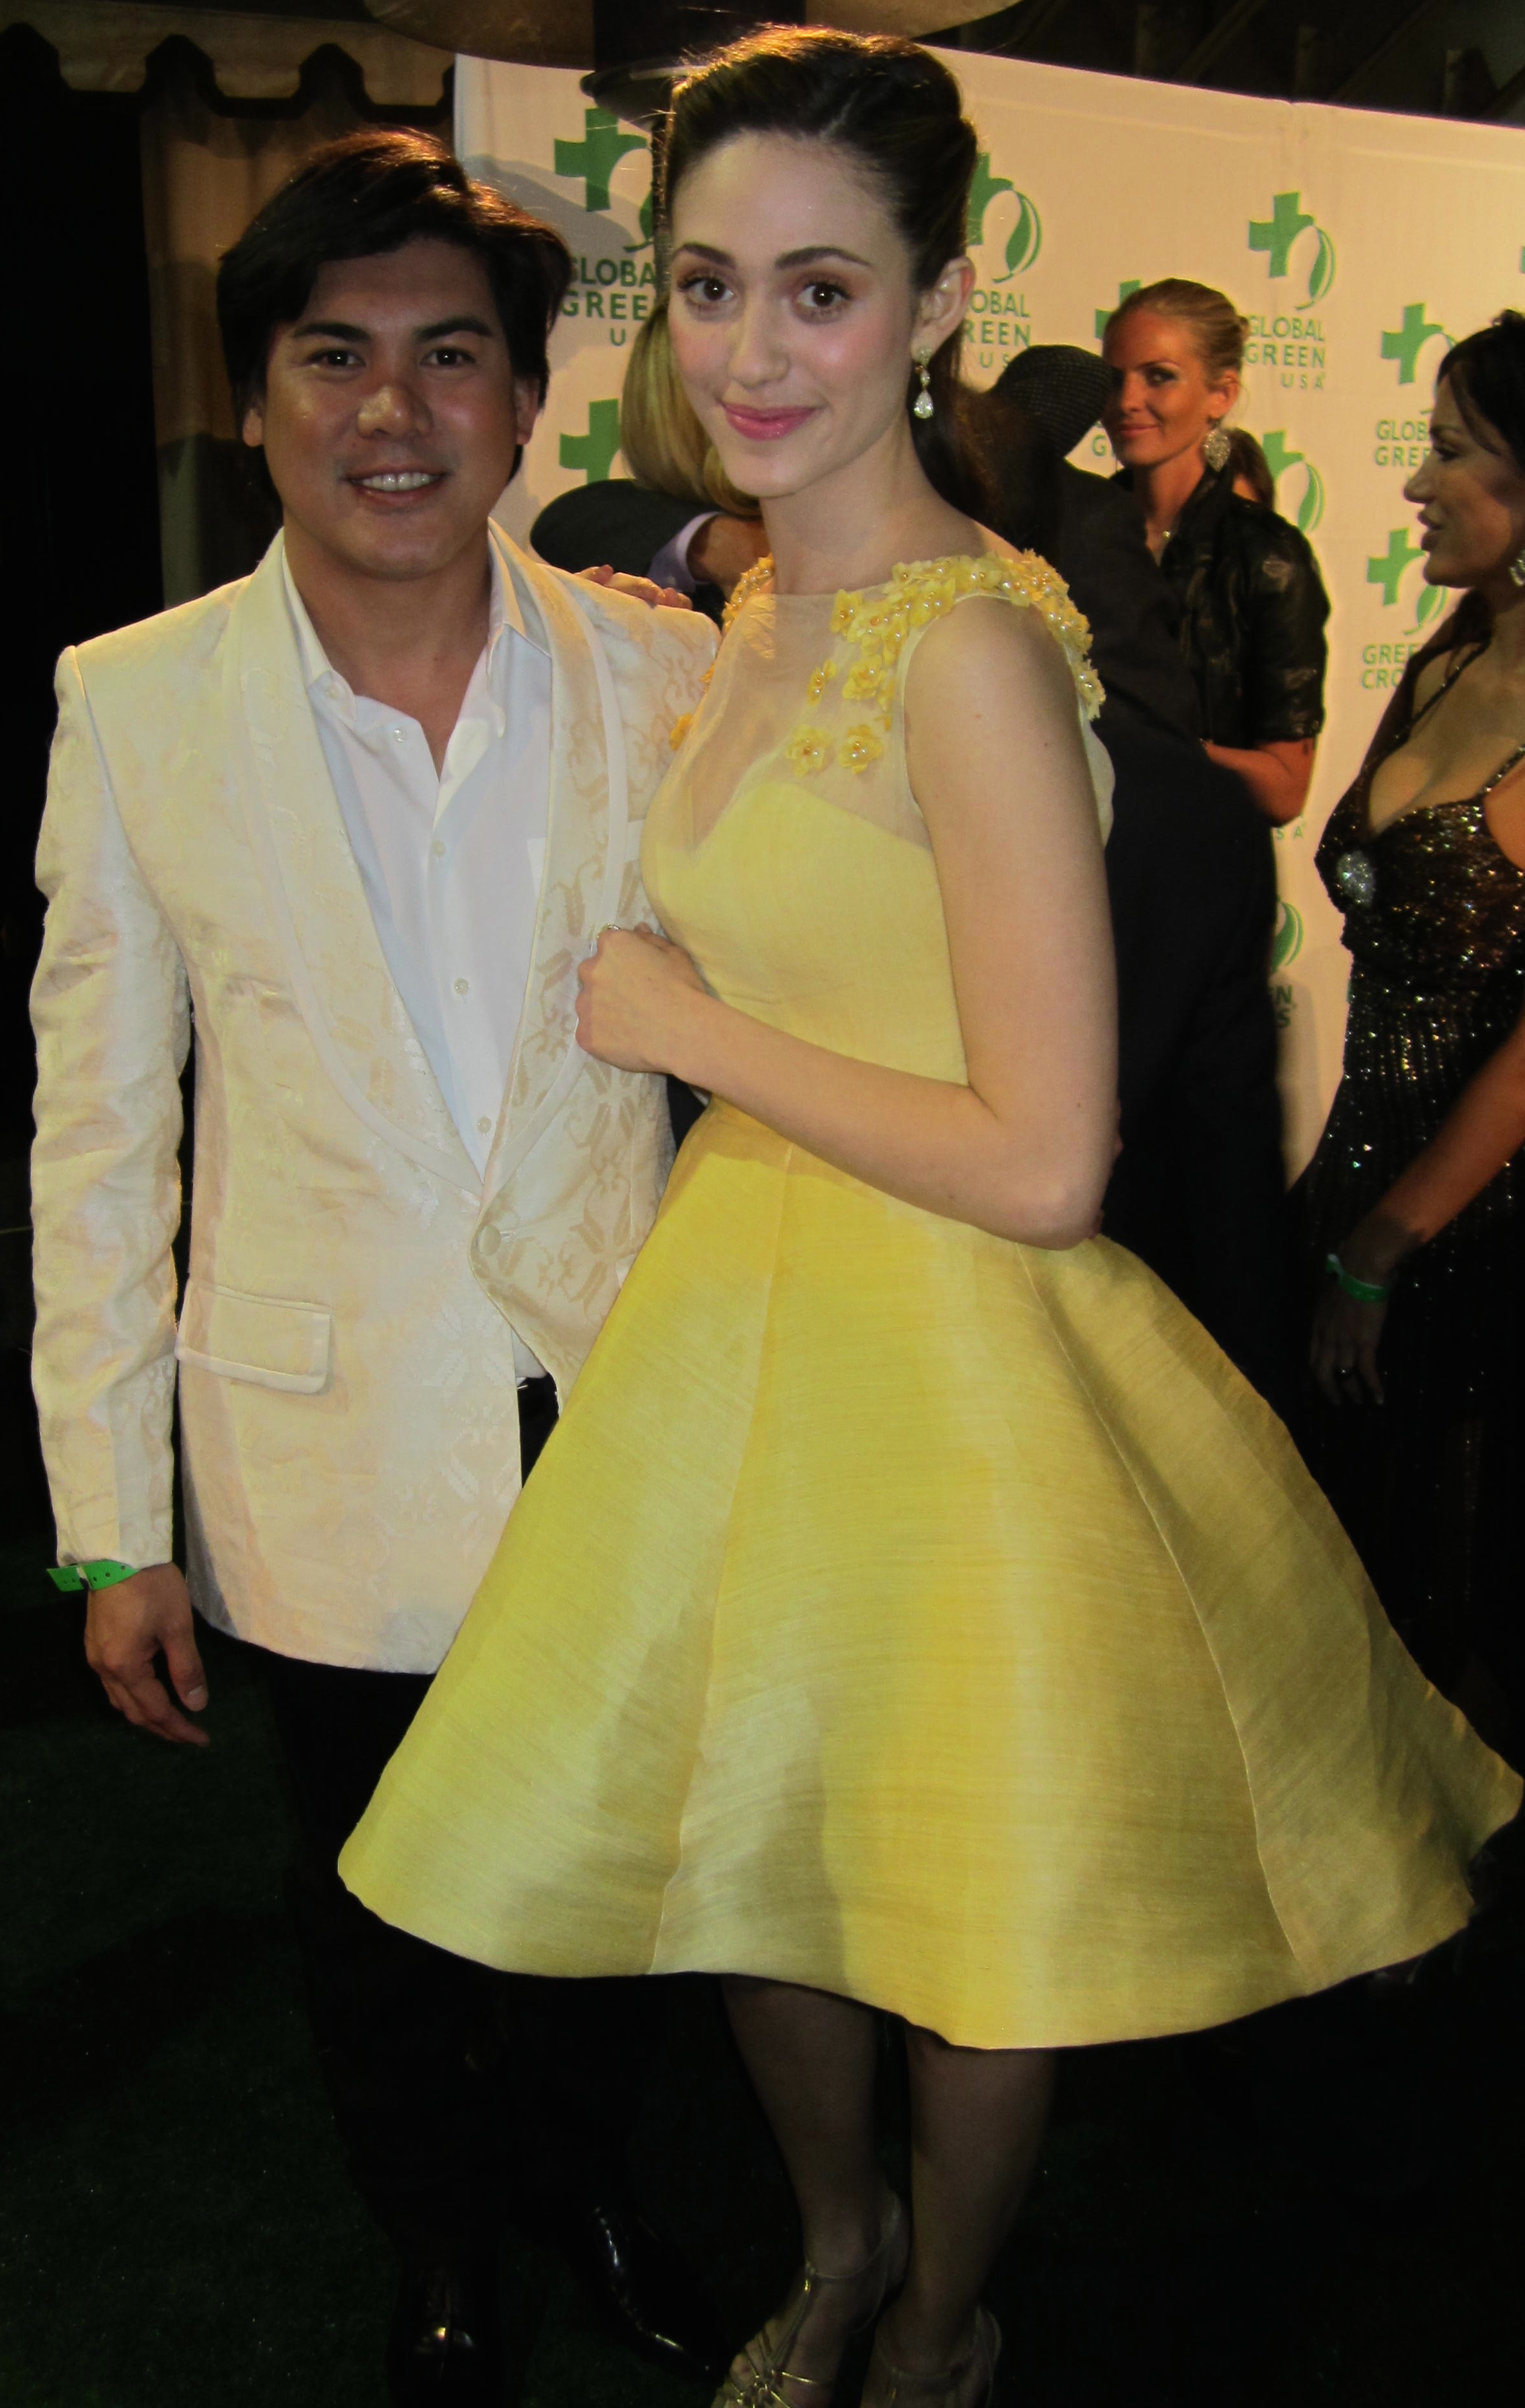 Oliver with Emmy Rossum in his dress at Pre-Oscar party 2012